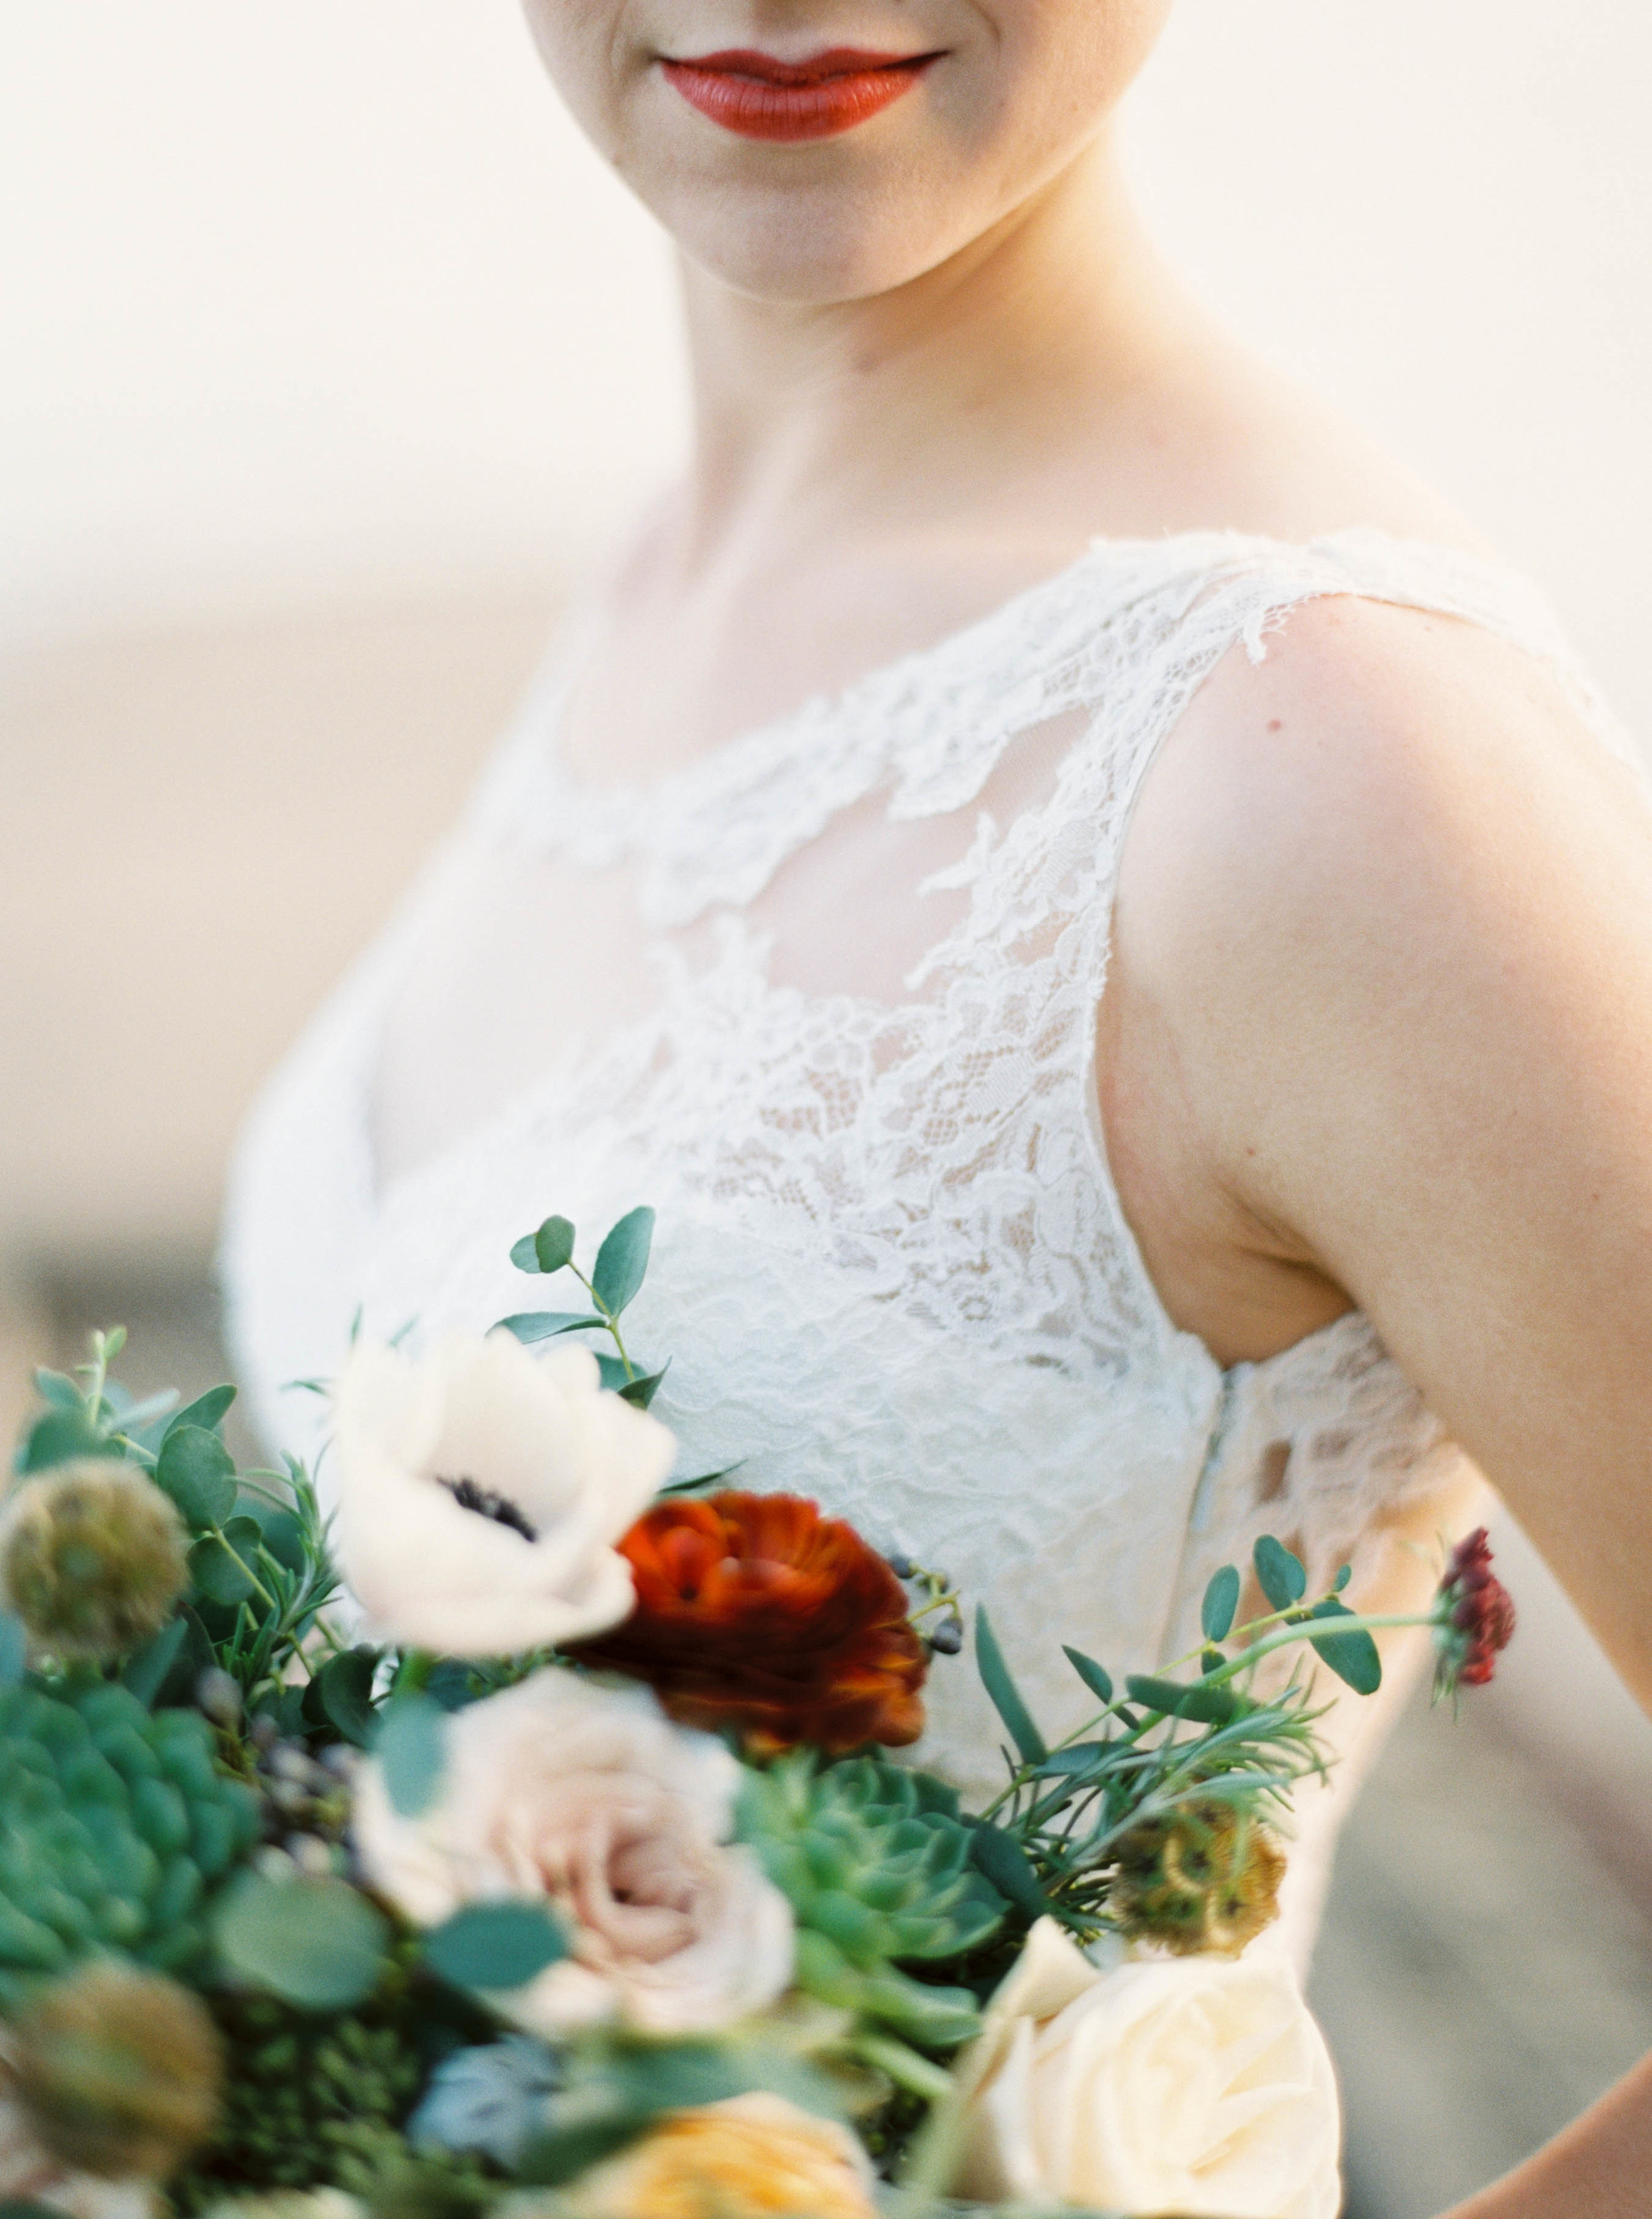 Loose, untamed bridal bouquet with olive branches, ranunculus, and succulents